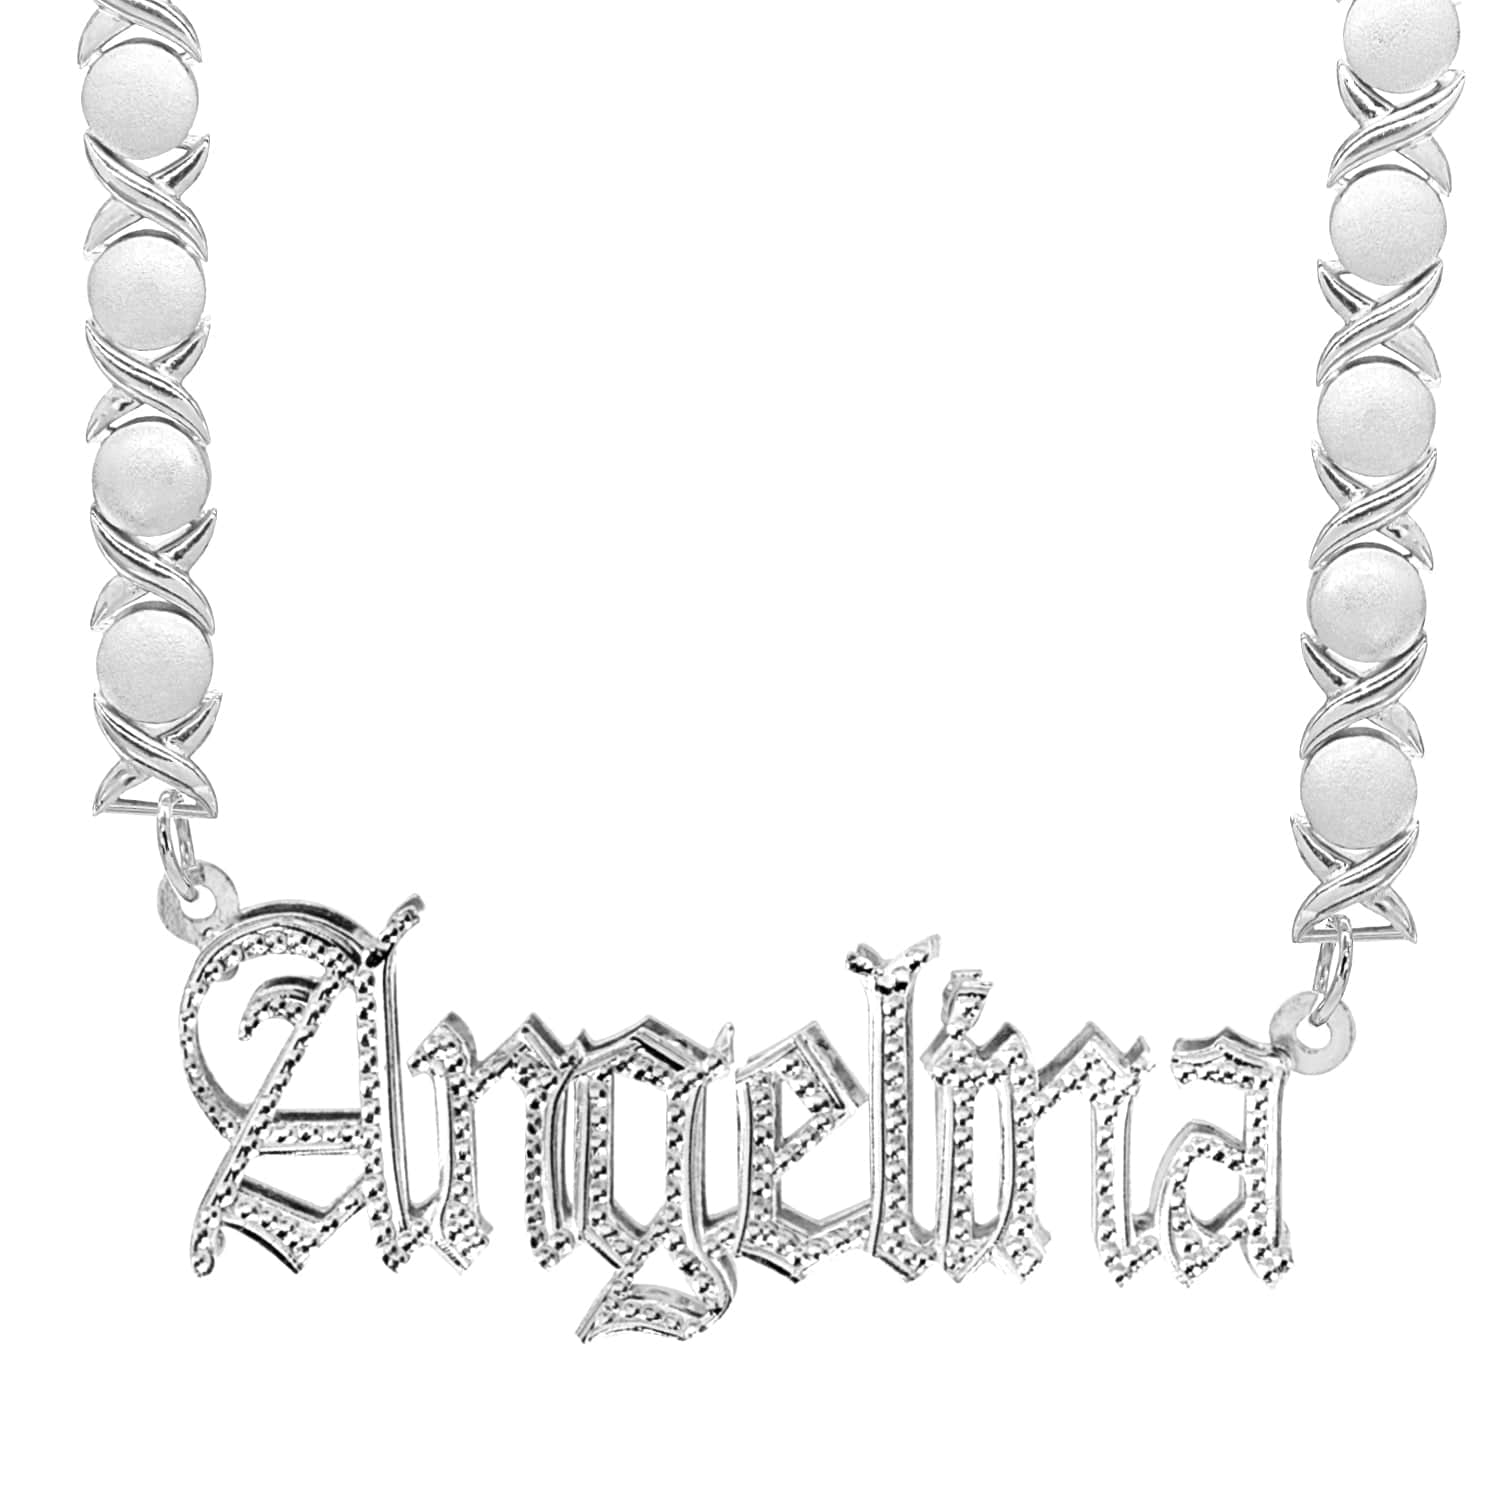 14K Gold over Sterling Silver / Rhodium Xoxo Chain Double Plated Name Necklace "Angelina" with Rhodium Xoxo Chain